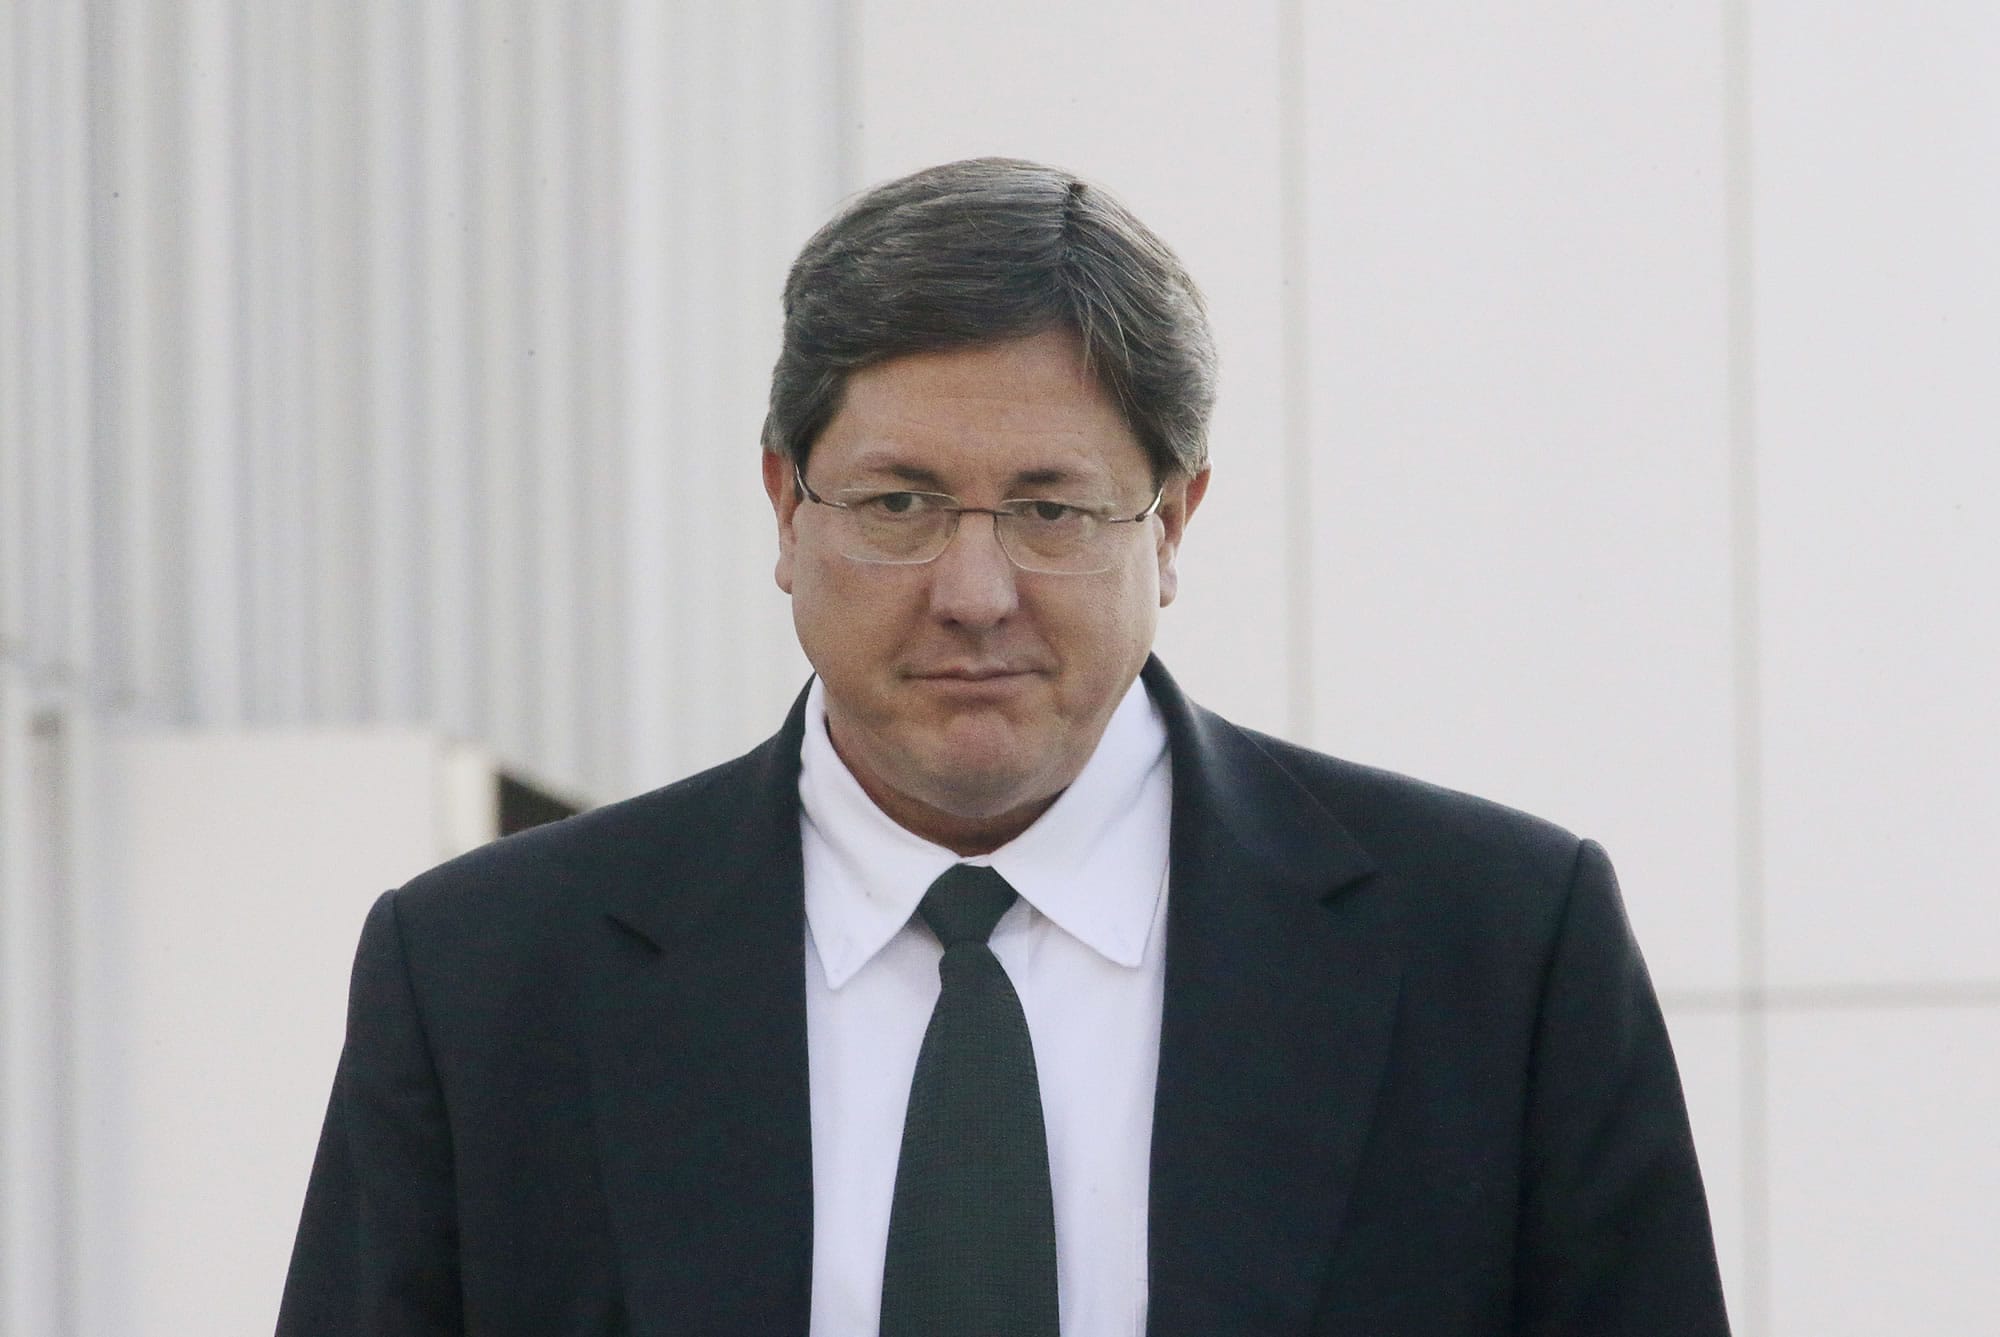 FILE - In this Jan. 21, 2015, file photo, polygamous sect leader Lyle Jeffs leaves the federal courthouse, in Salt Lake City. Polygamous sect leader Jeffs has been captured after being on the run for nearly a year. An FBI spokeswoman said Thursday, June 15, 2017, that Jeffs was arrested in South Dakota on Wednesday, June 14.